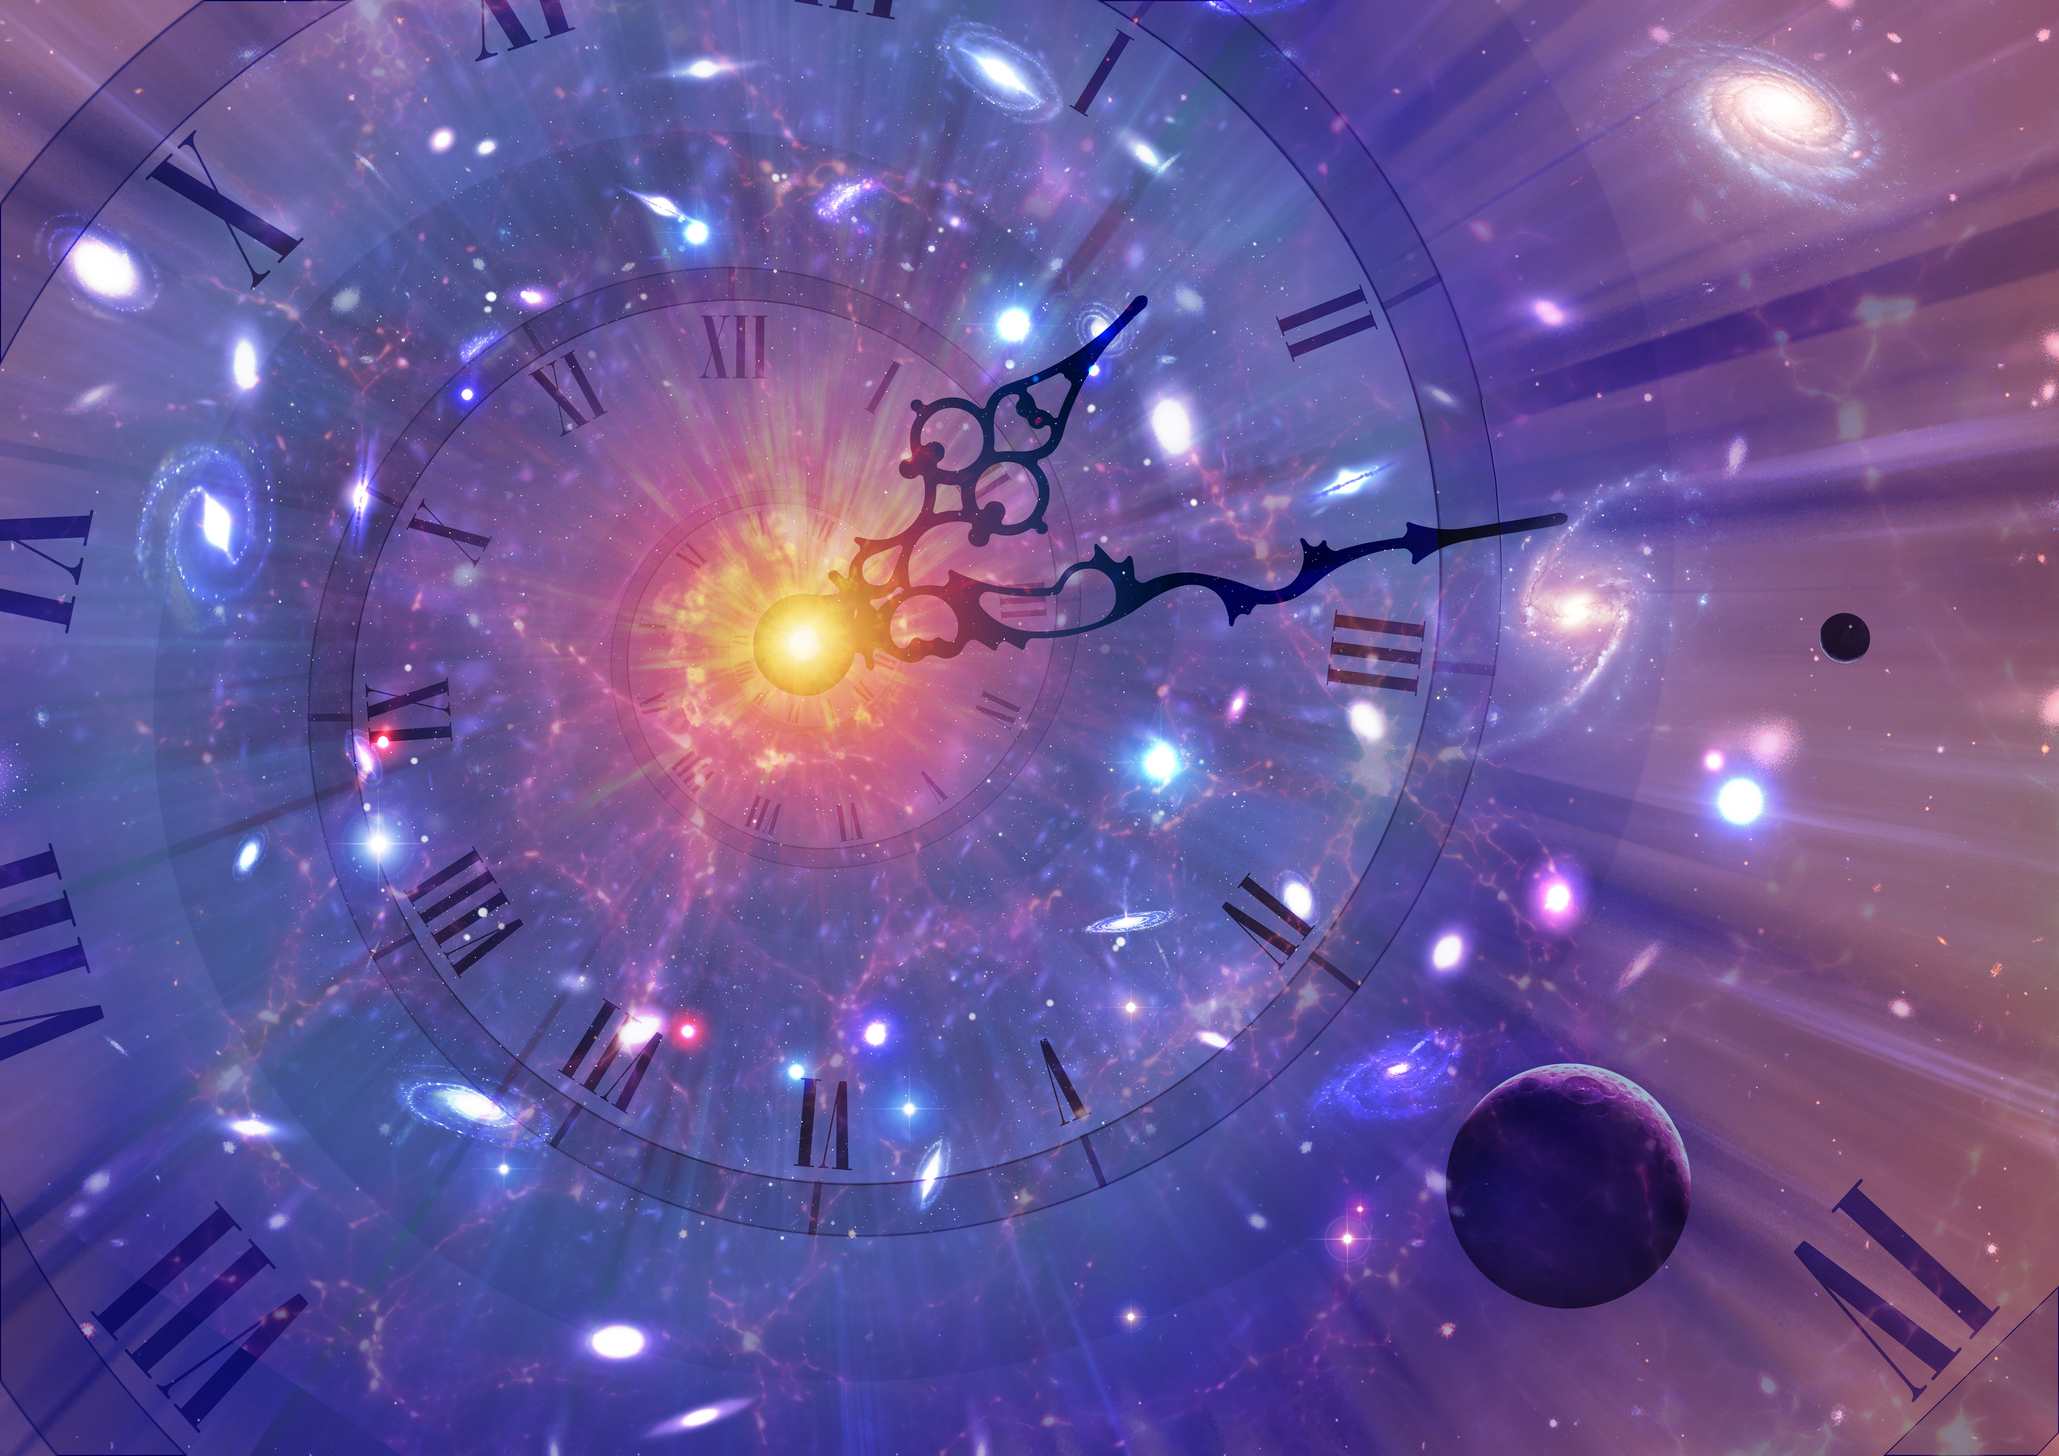 Conceptual illustration of time dilation in Einstein’s relativity